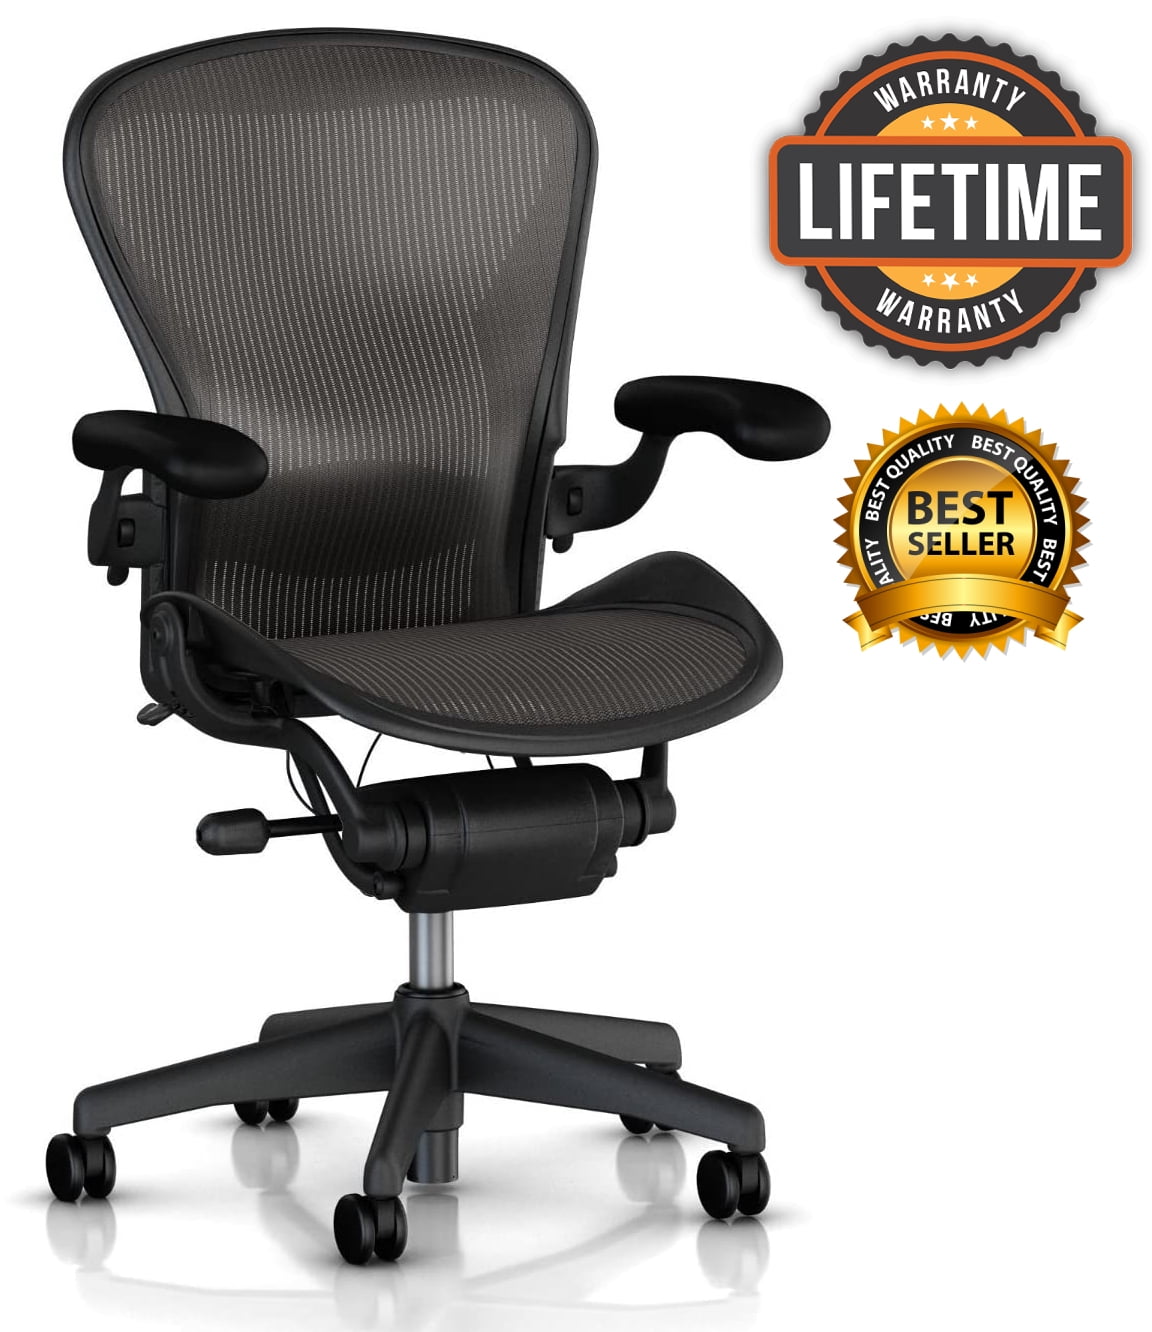 Used Classic Herman Miller Aeron Black Office Chair with Adjustable Size B - Walmart.com